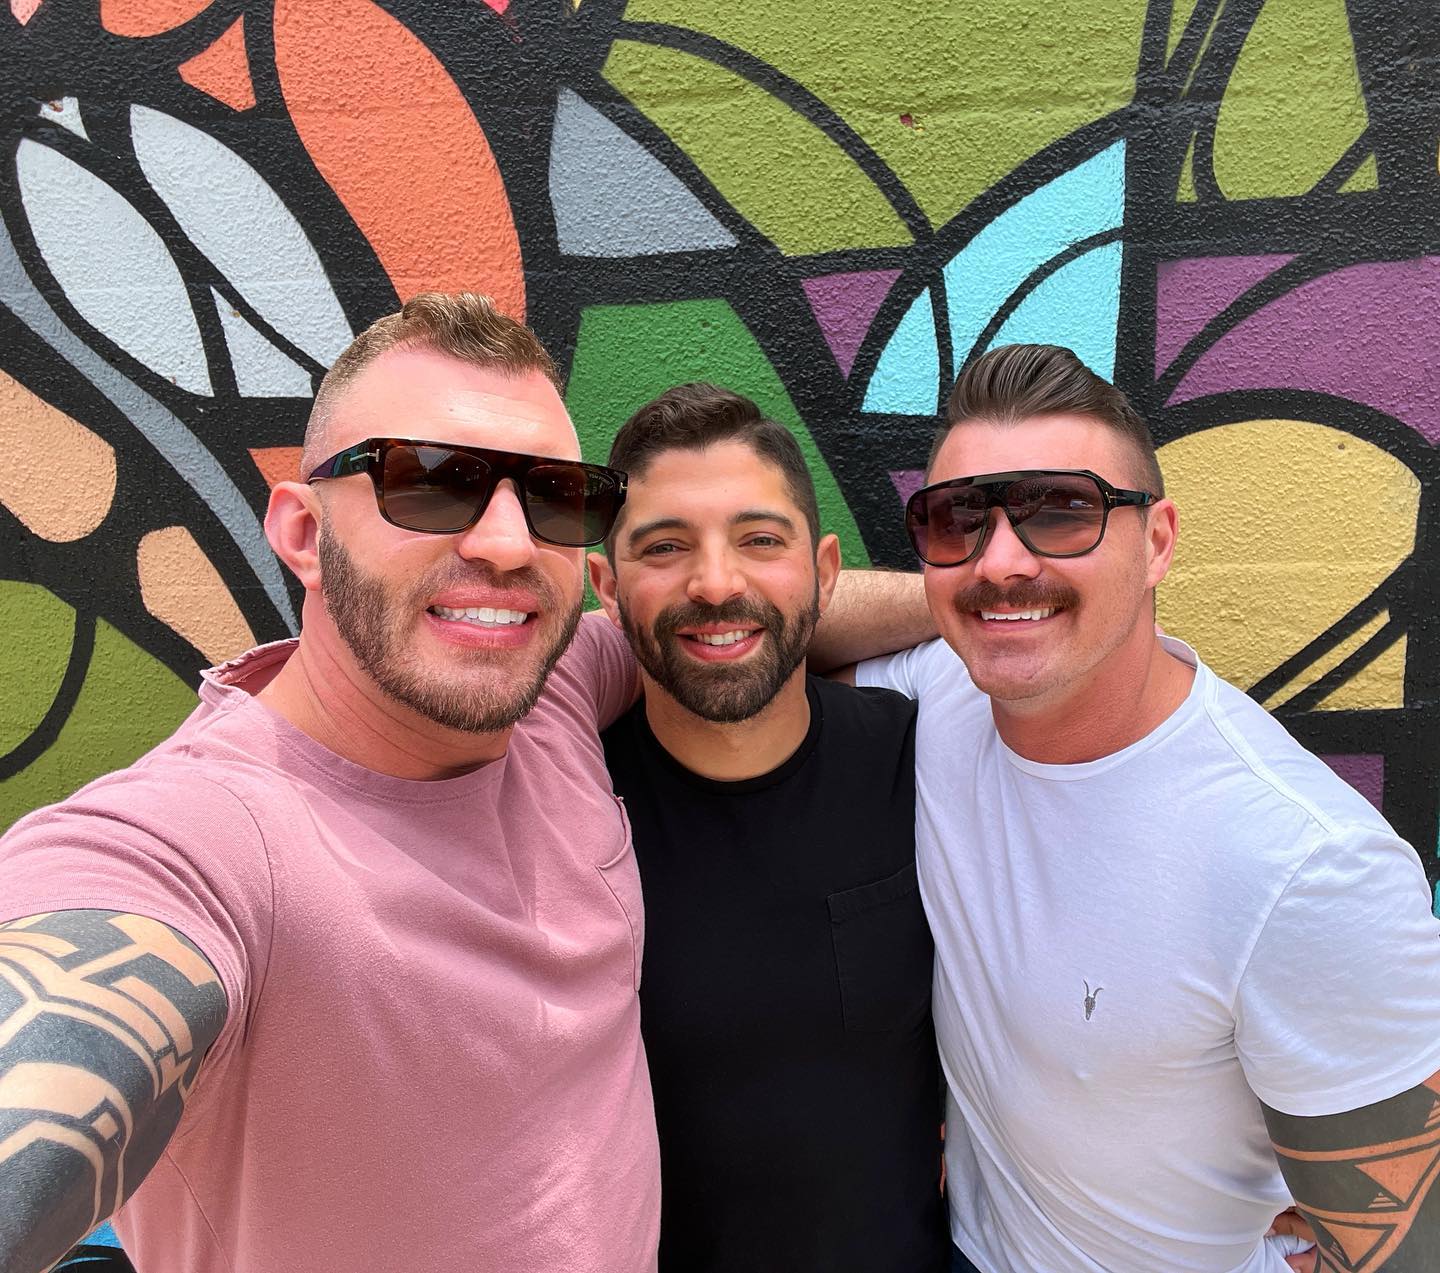 Couldn’t think of a better way to spend the weekend than with these two! 😁🤗
.
.
.
#gay #pride #pridemonth #lovewins #art #tattoo #sleevetattoo #friends